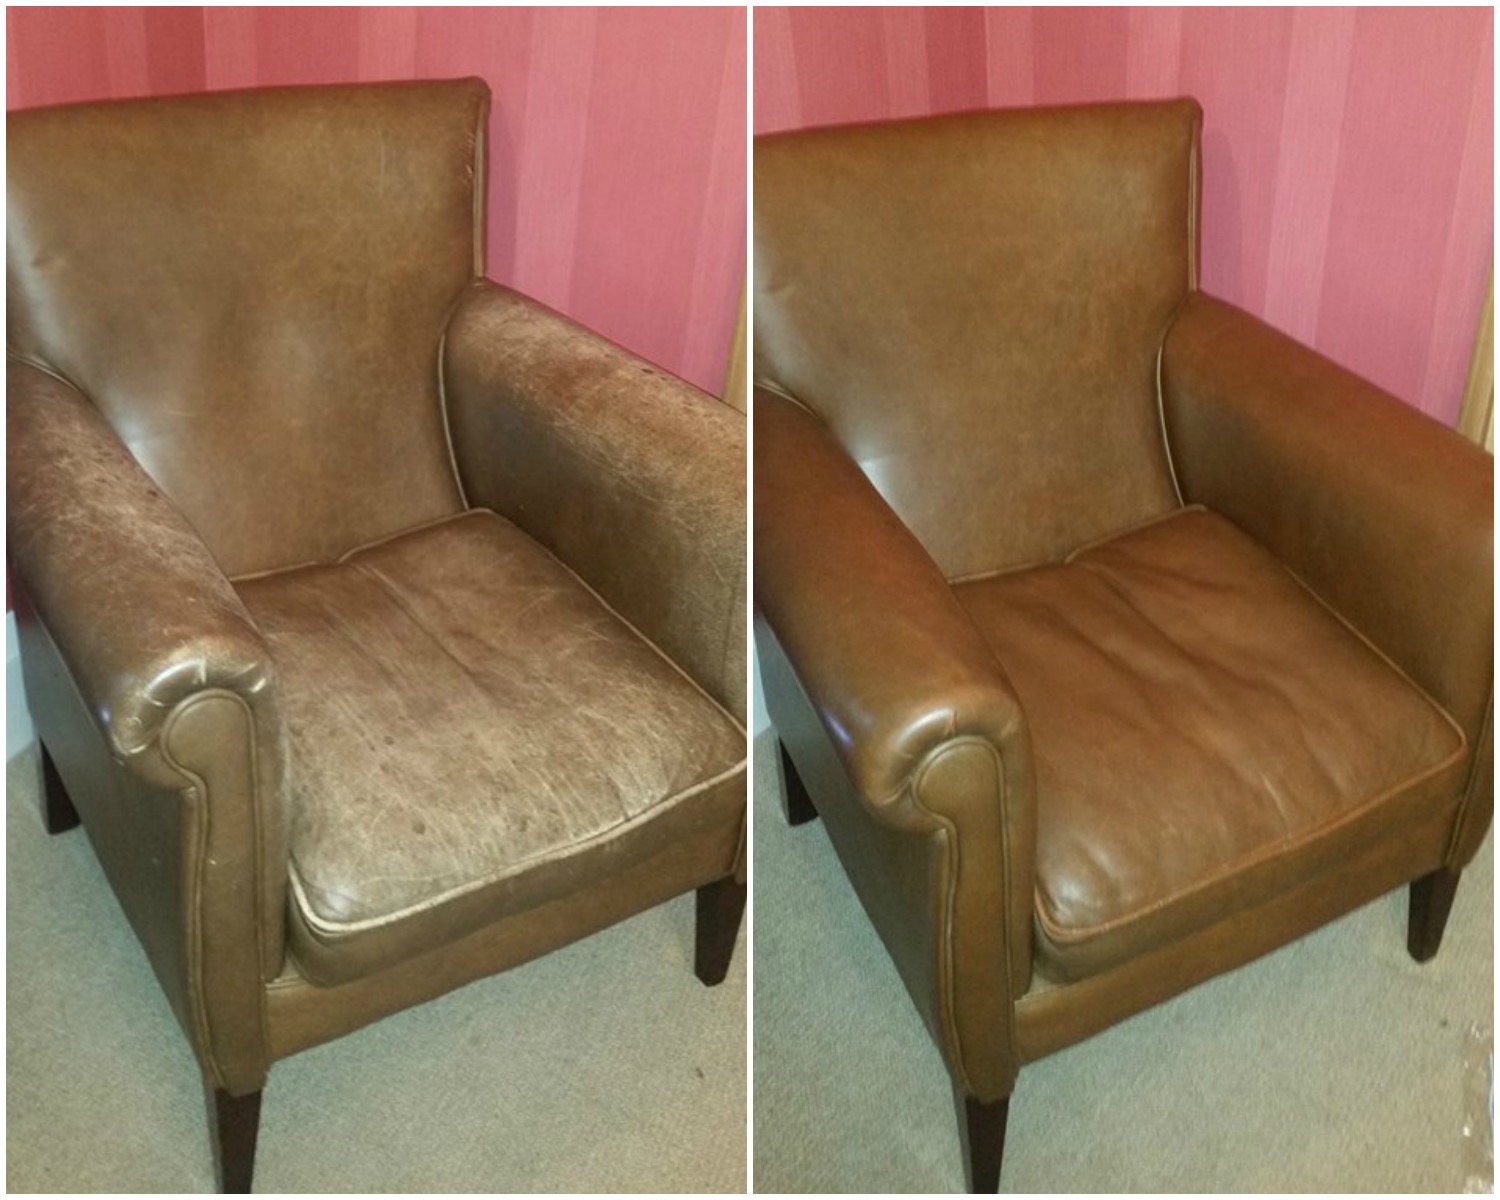 Our Top-Rated Leather Recoloring Product Online - Furniture Clinic